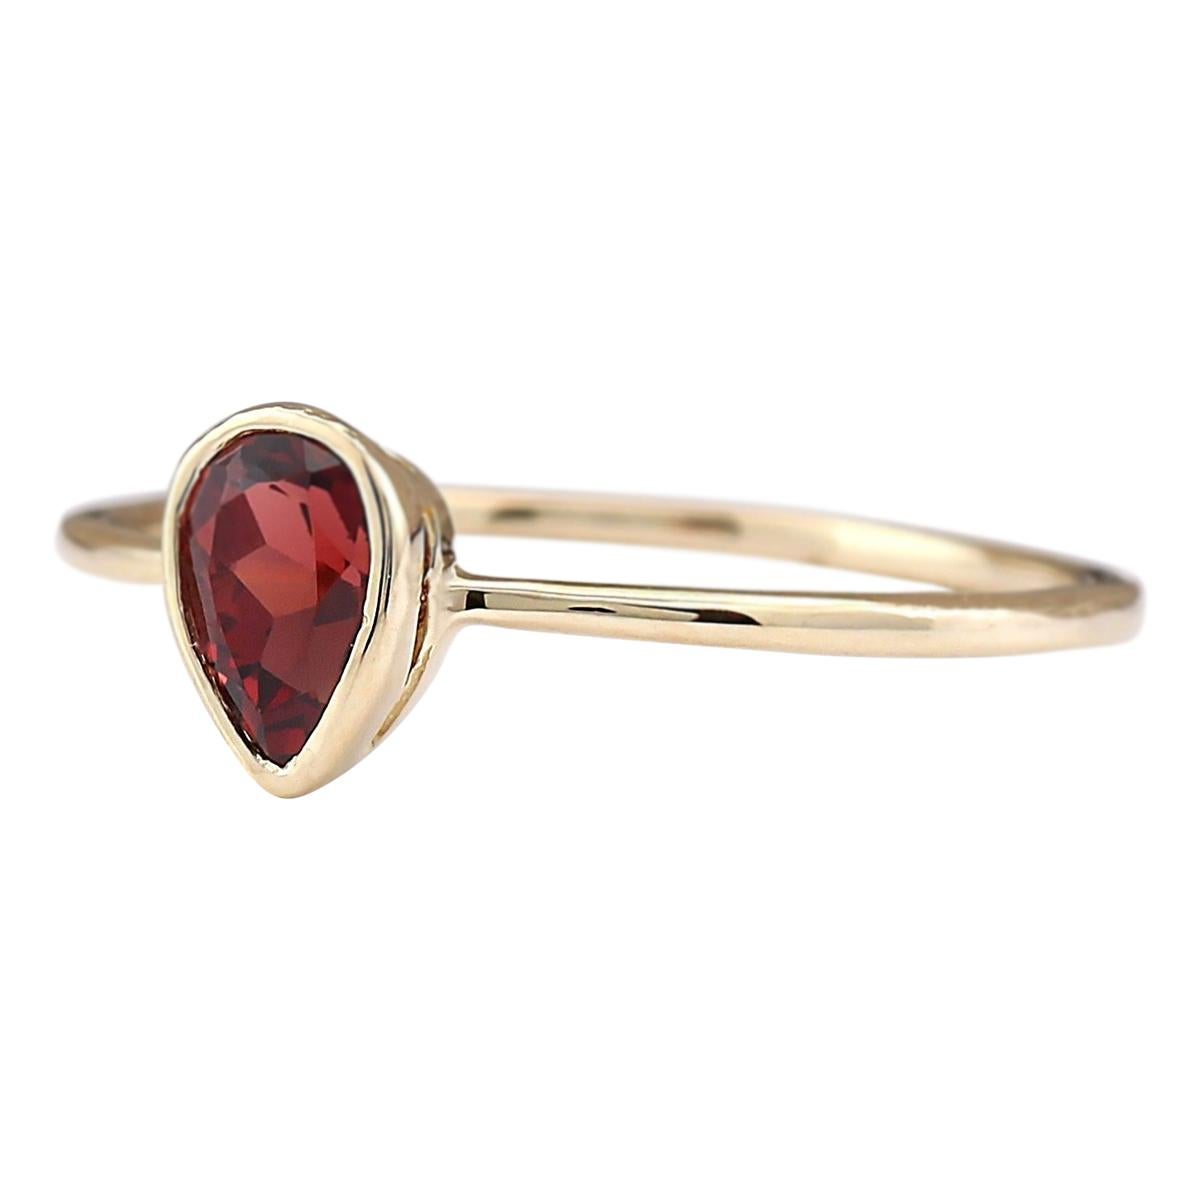 Stamped: 14K Yellow Gold
Total Ring Weight: 1.1 Grams
Ring Length: N/A
Ring Width: N/A
Gemstone Weight: Total Natural Garnet Weight is 0.50 Carat
Color: Red
Face Measures: 6.00x4.00 mm
Sku: [703378W]